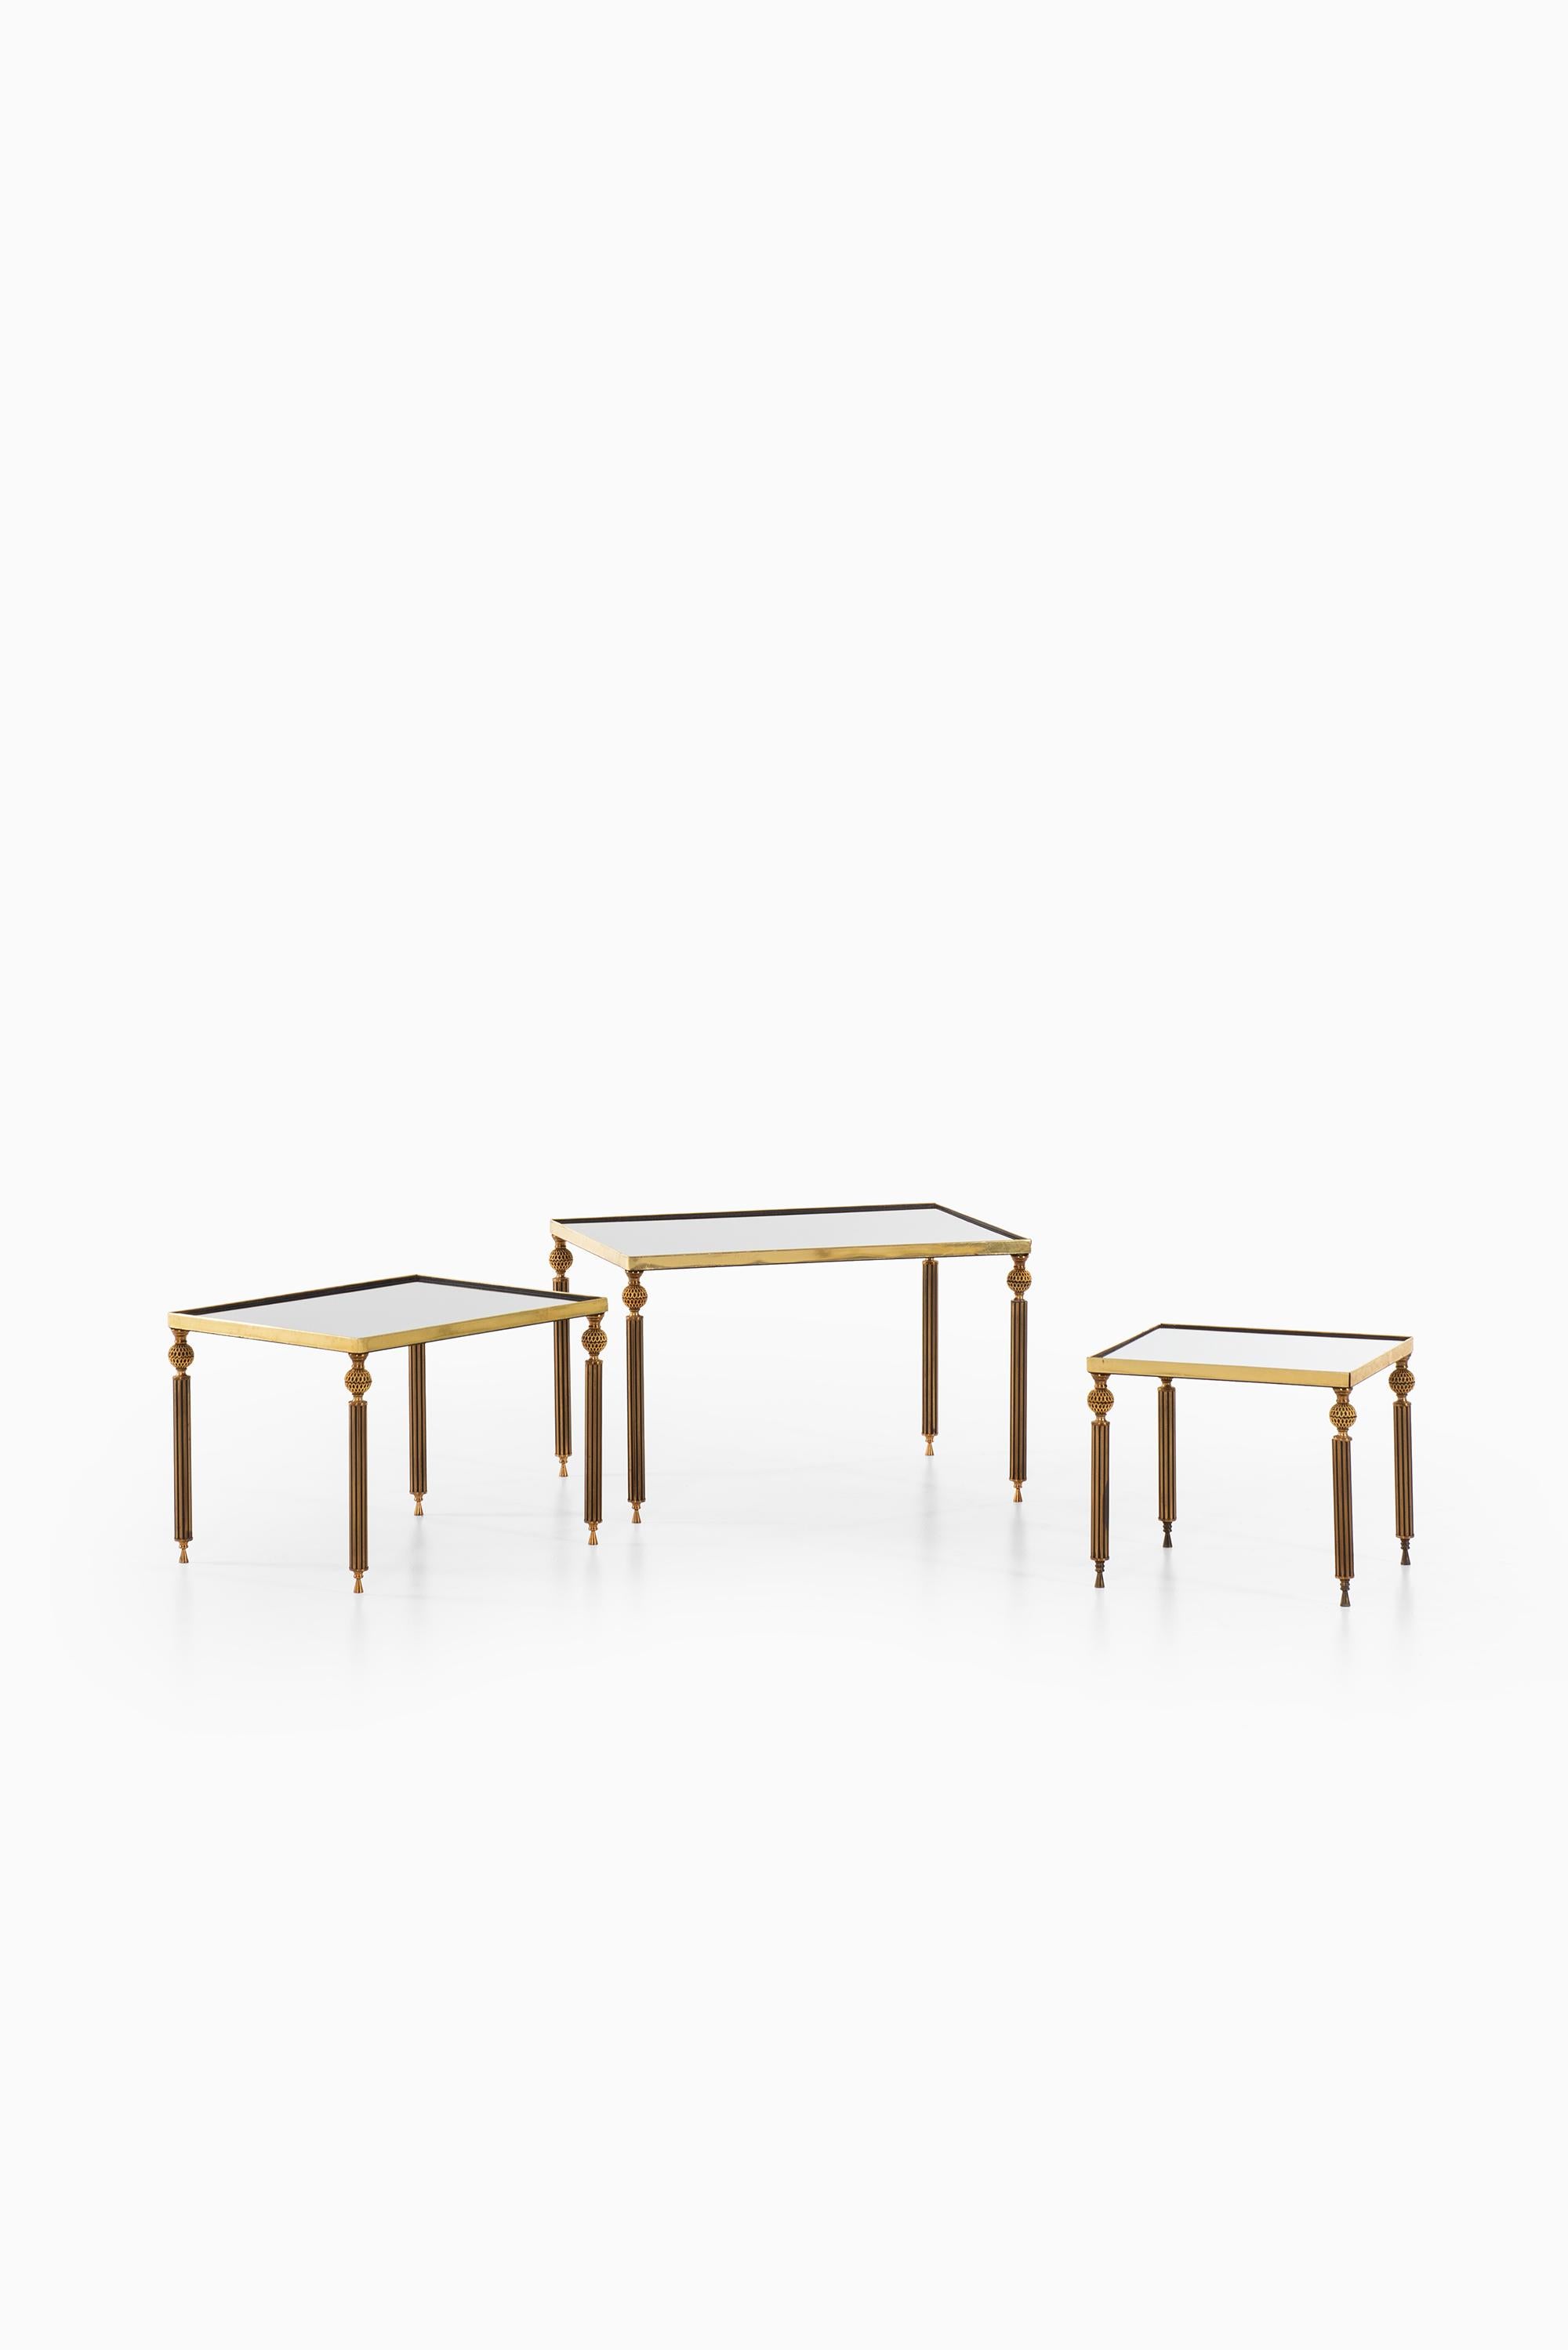 Nesting Tables in Brass and Glass Probably Produced in Italy In Good Condition For Sale In Limhamn, Skåne län